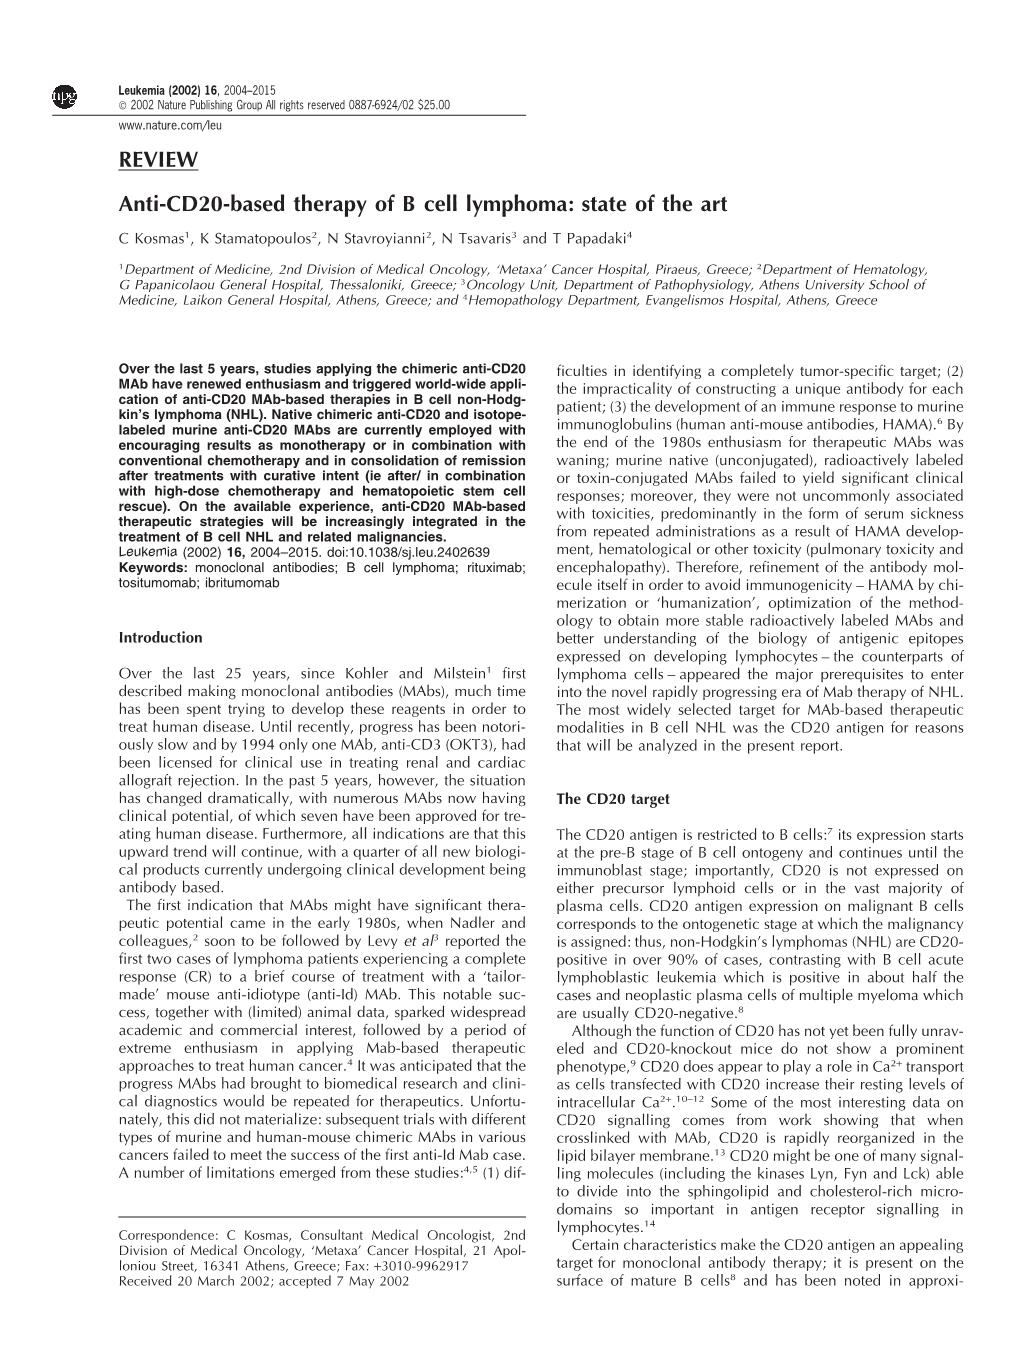 REVIEW Anti-CD20-Based Therapy of B Cell Lymphoma: State of The